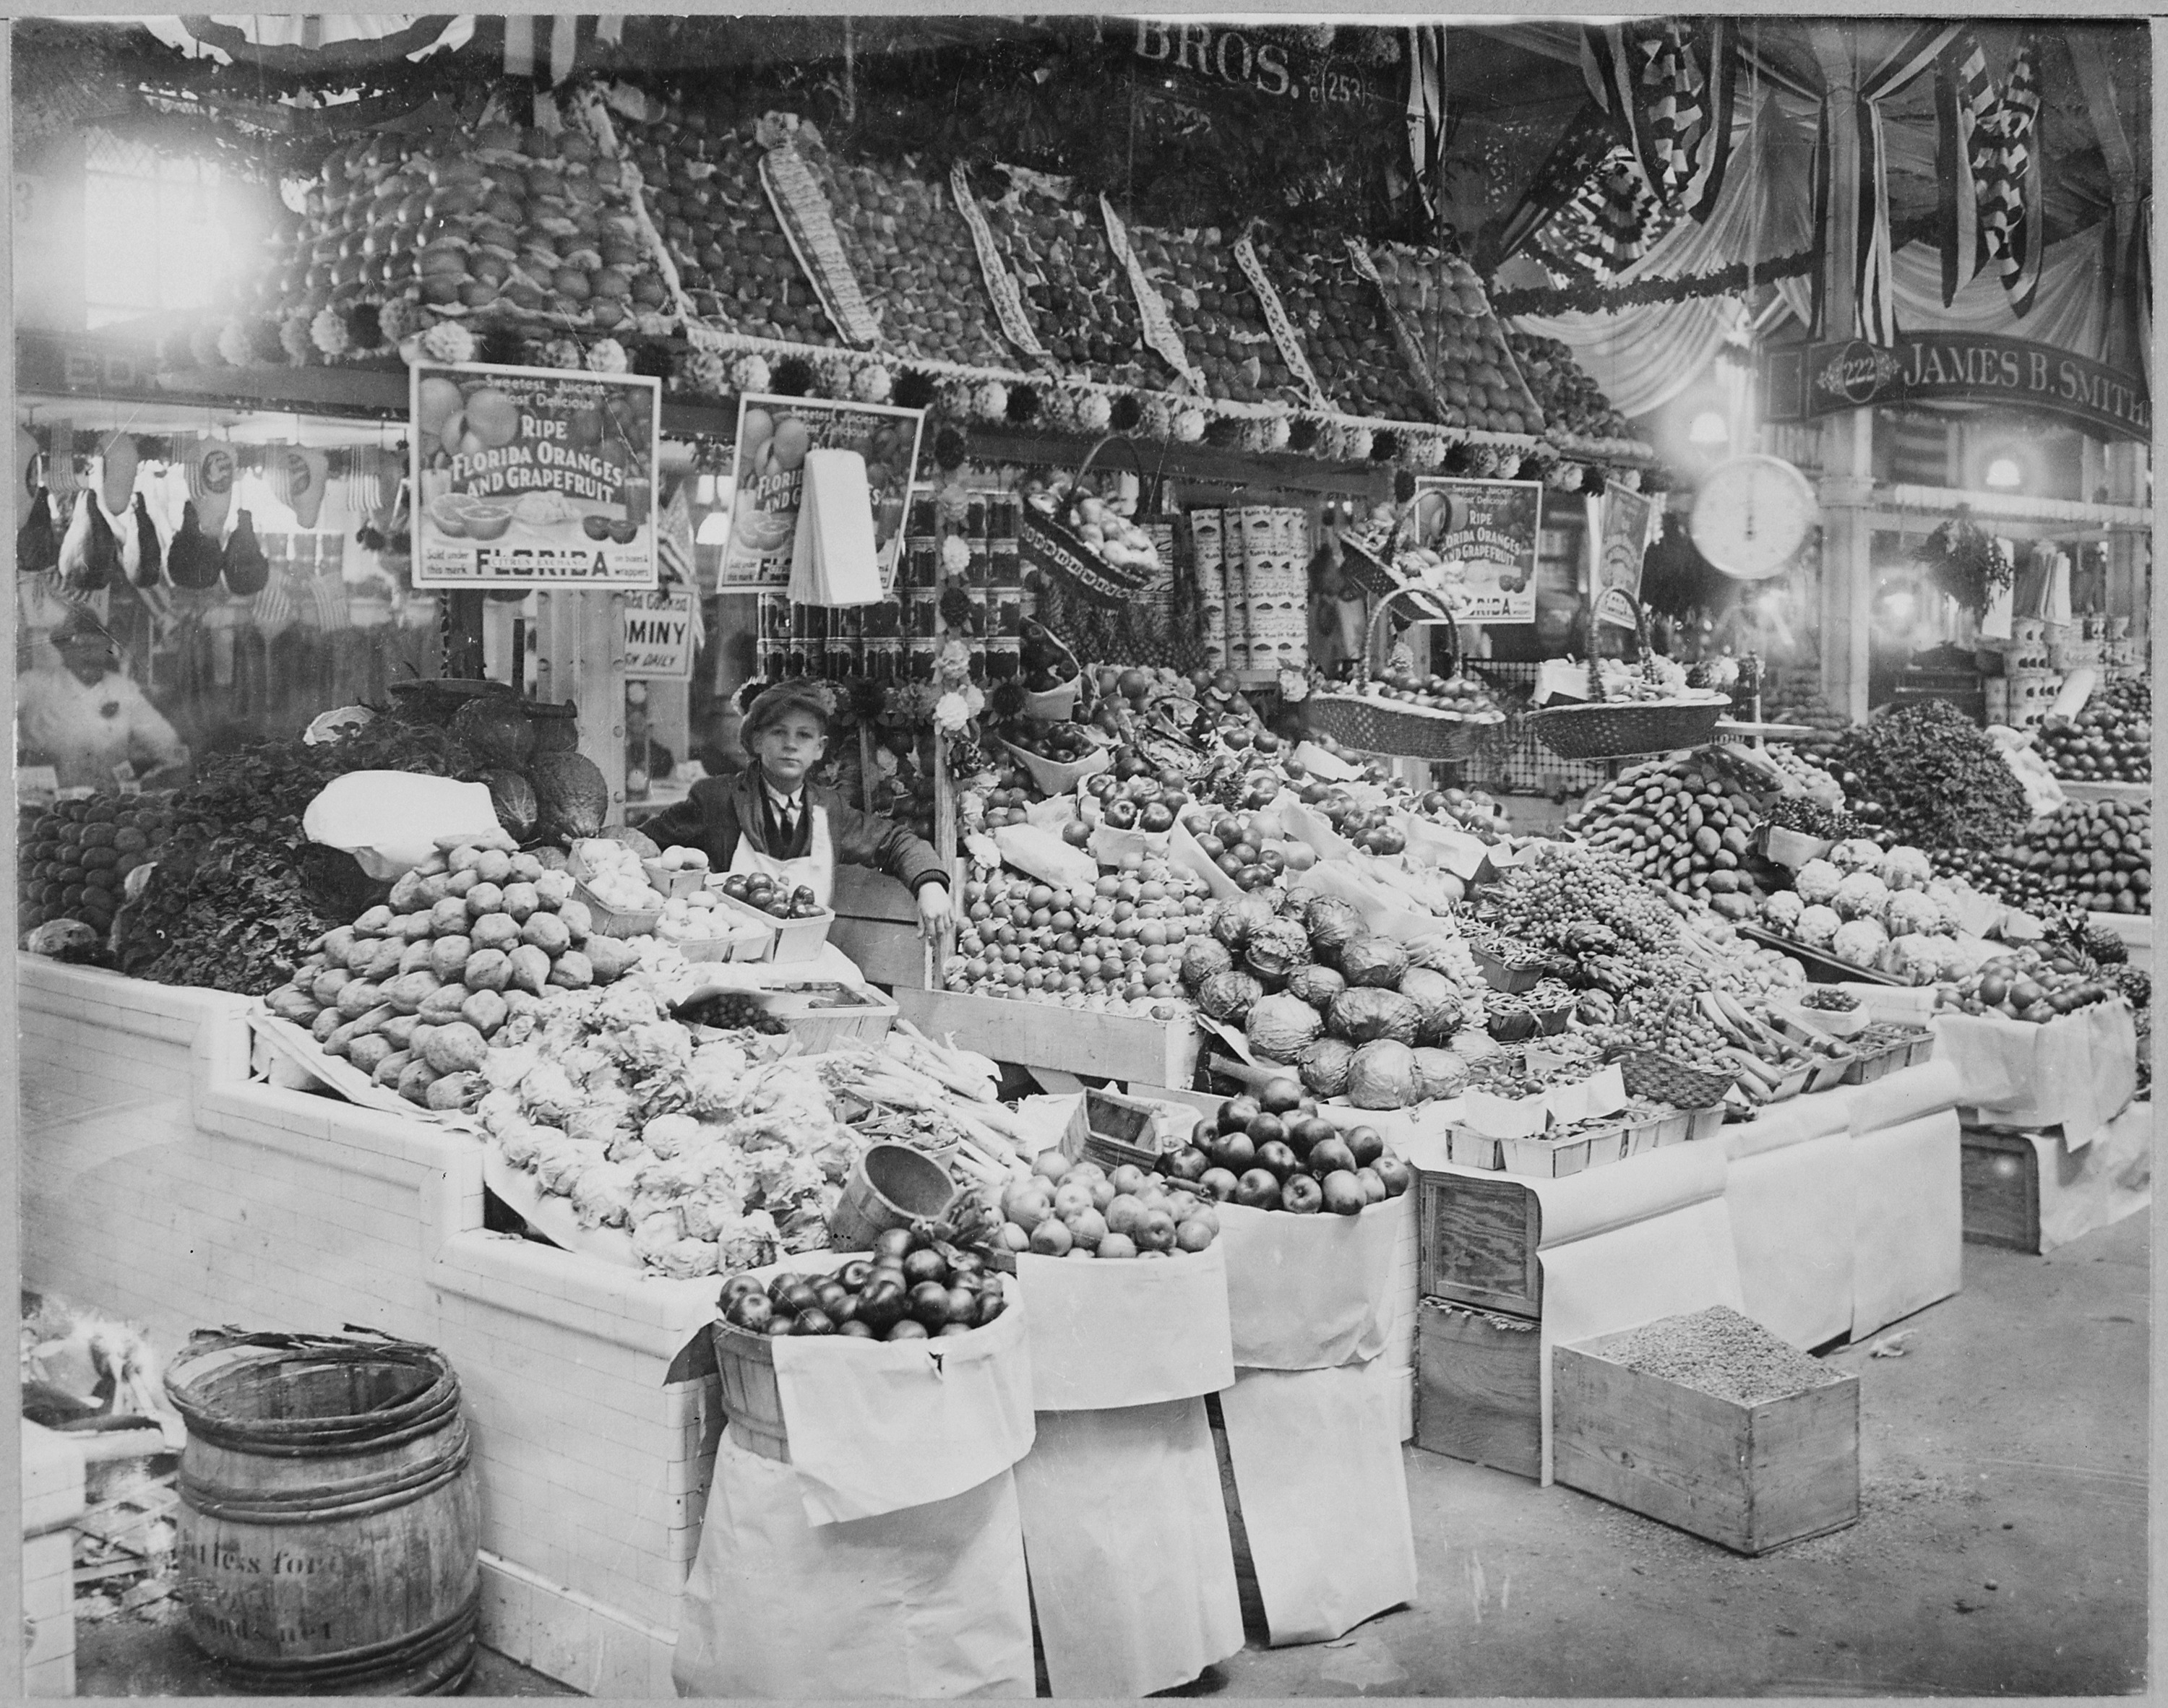 Young boy tending freshly stocked fruit and vegetable stand at Center Market, 02-18-1915 - NARA - 521049